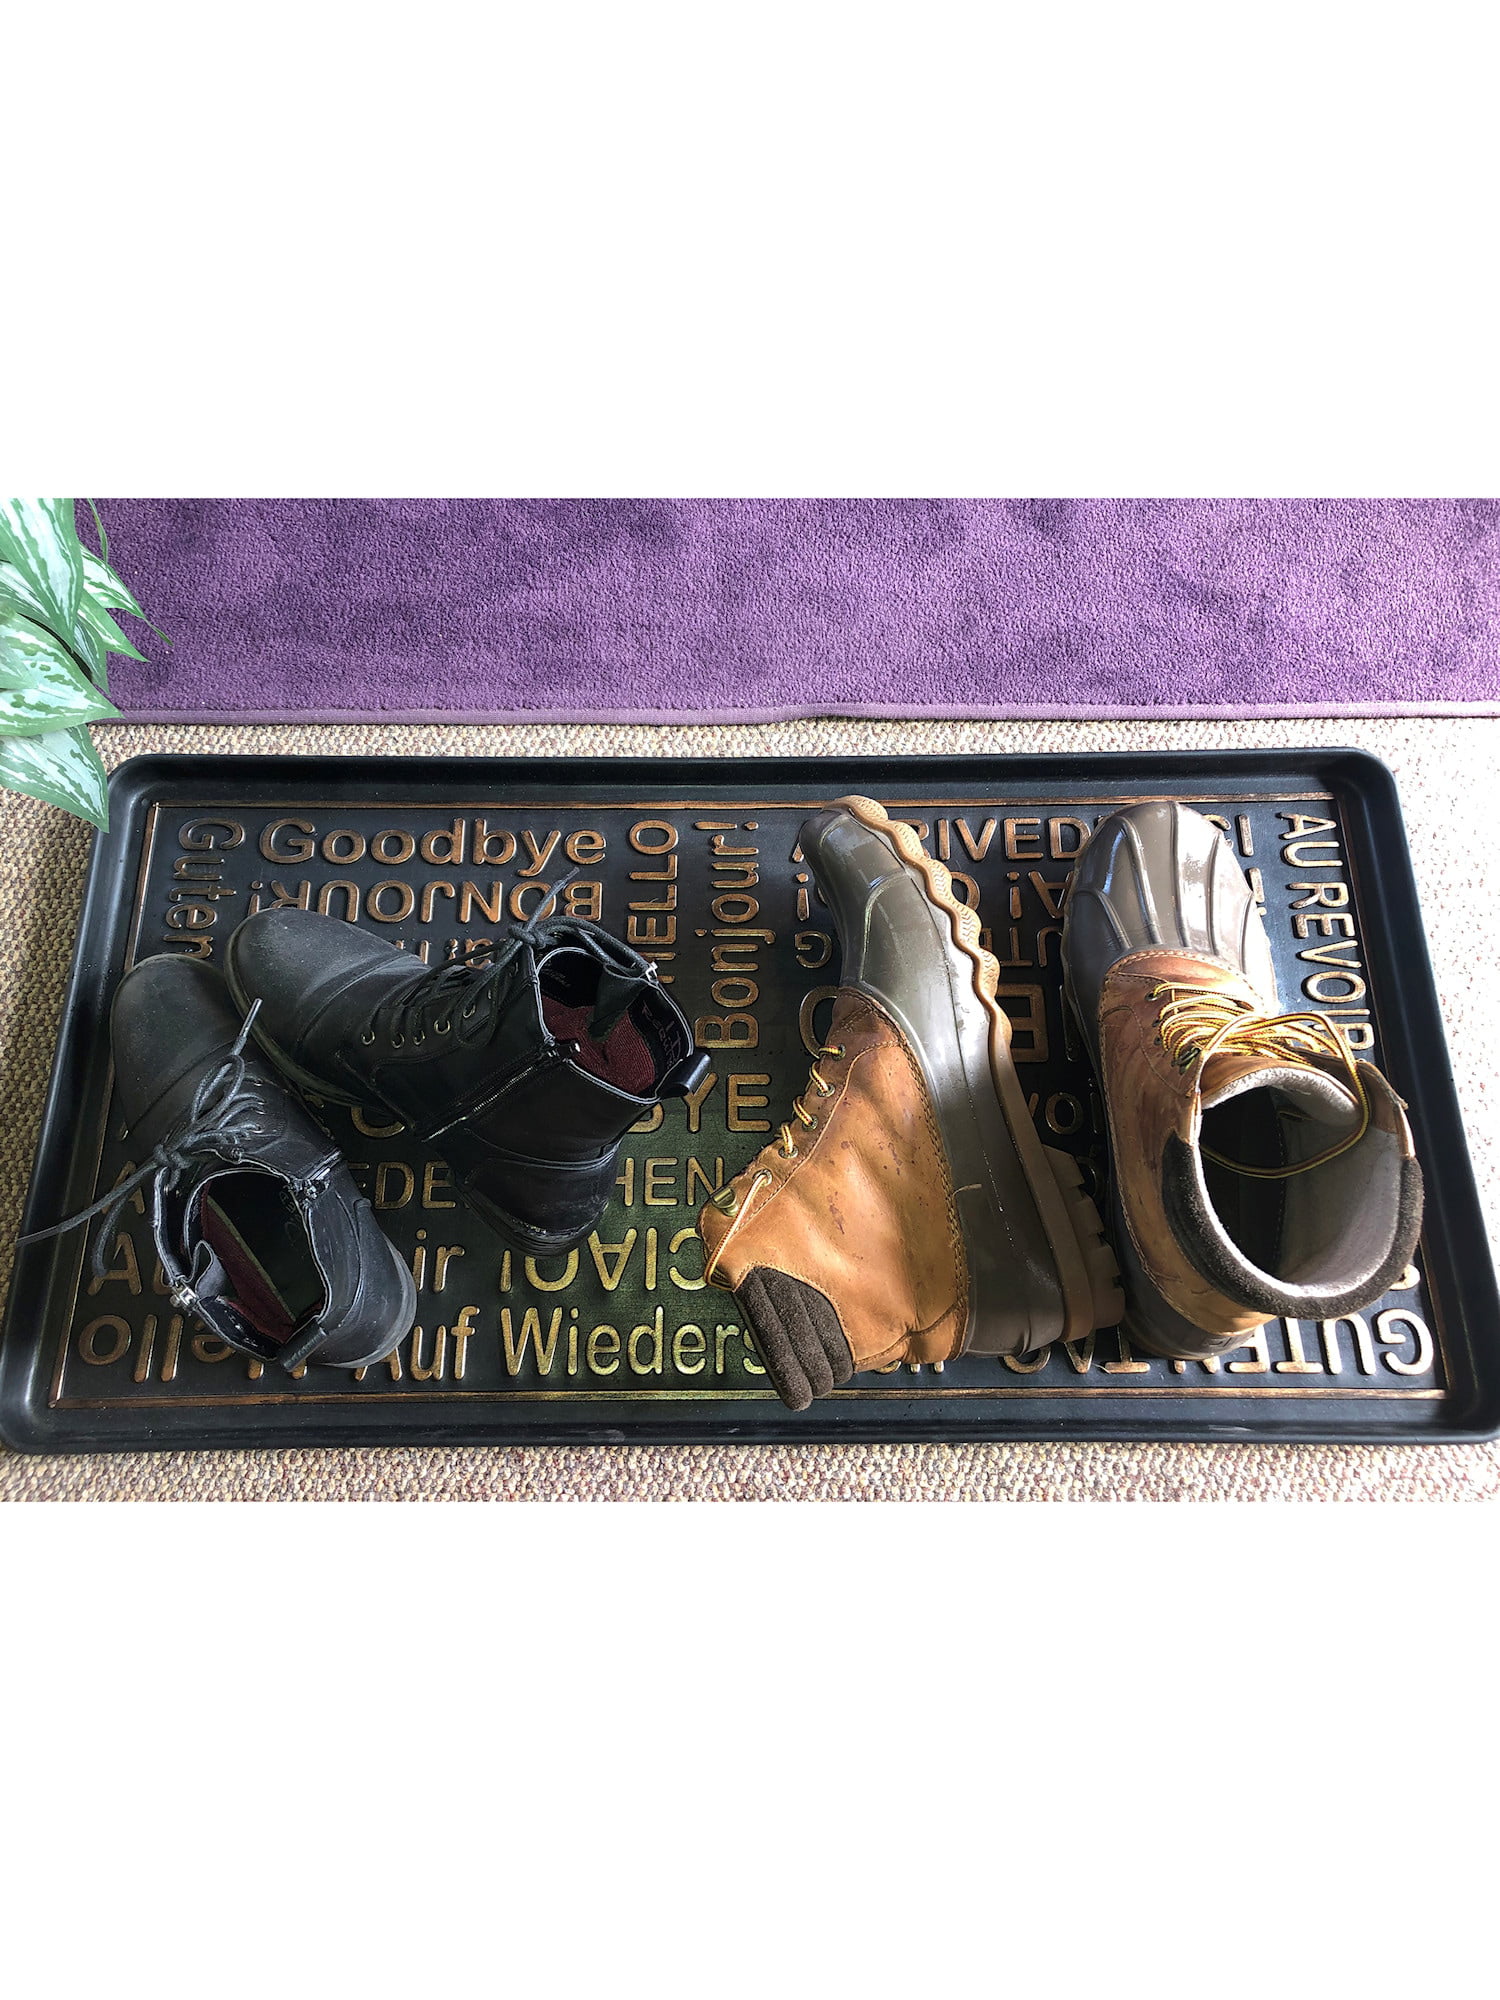 ART & ARTIFACT Rubber Boot Tray Wet Shoe Tray for Entryway Indoor Outdoor  Snow Boot Mat Extra Large Shoe Tray 32' x 16', Black, Damask